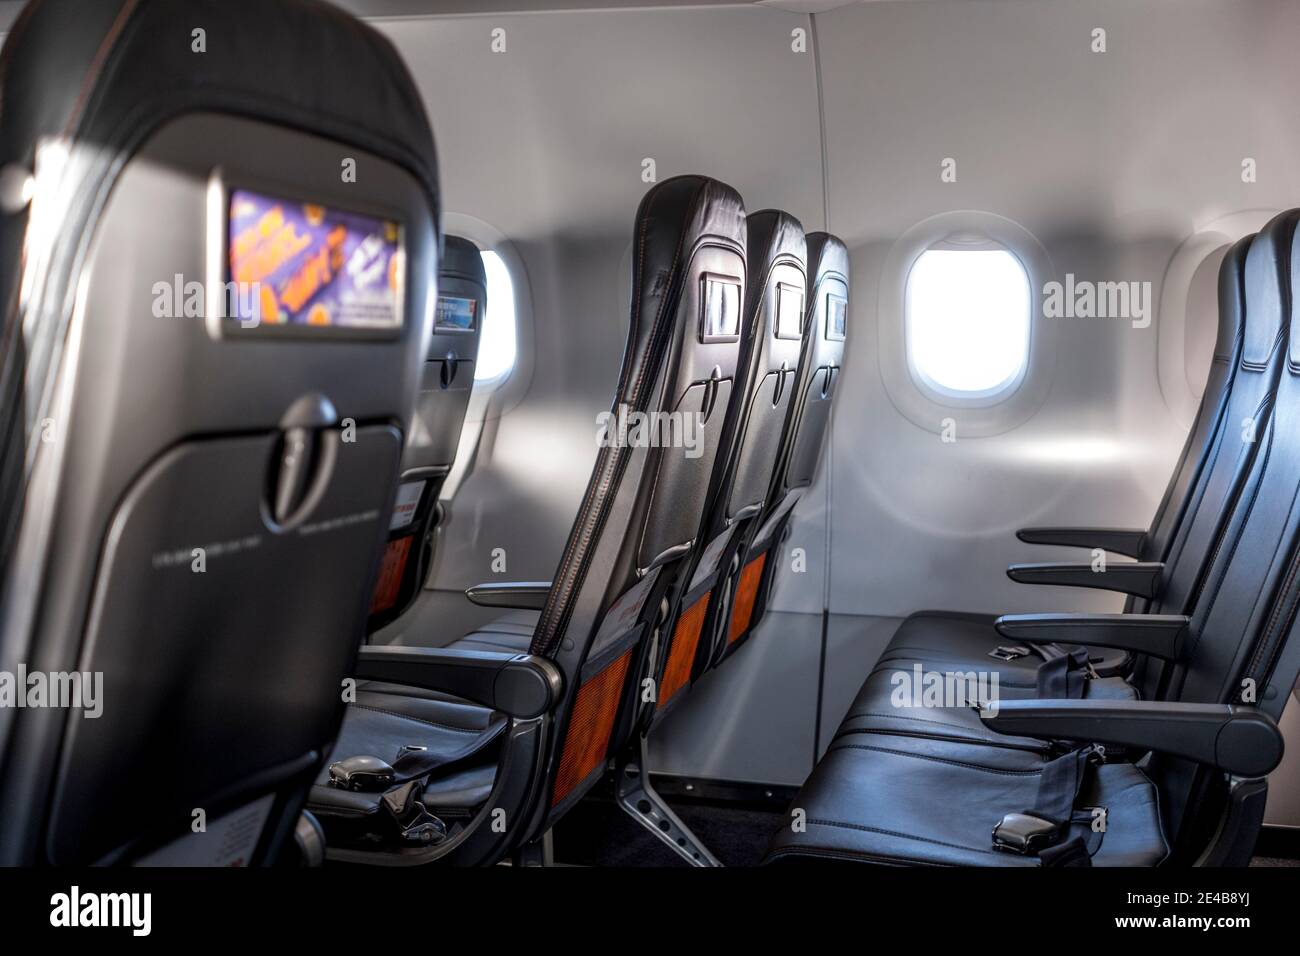 Empty seats on an Easyjet flight during the Covid-19 pandemic Stock Photo